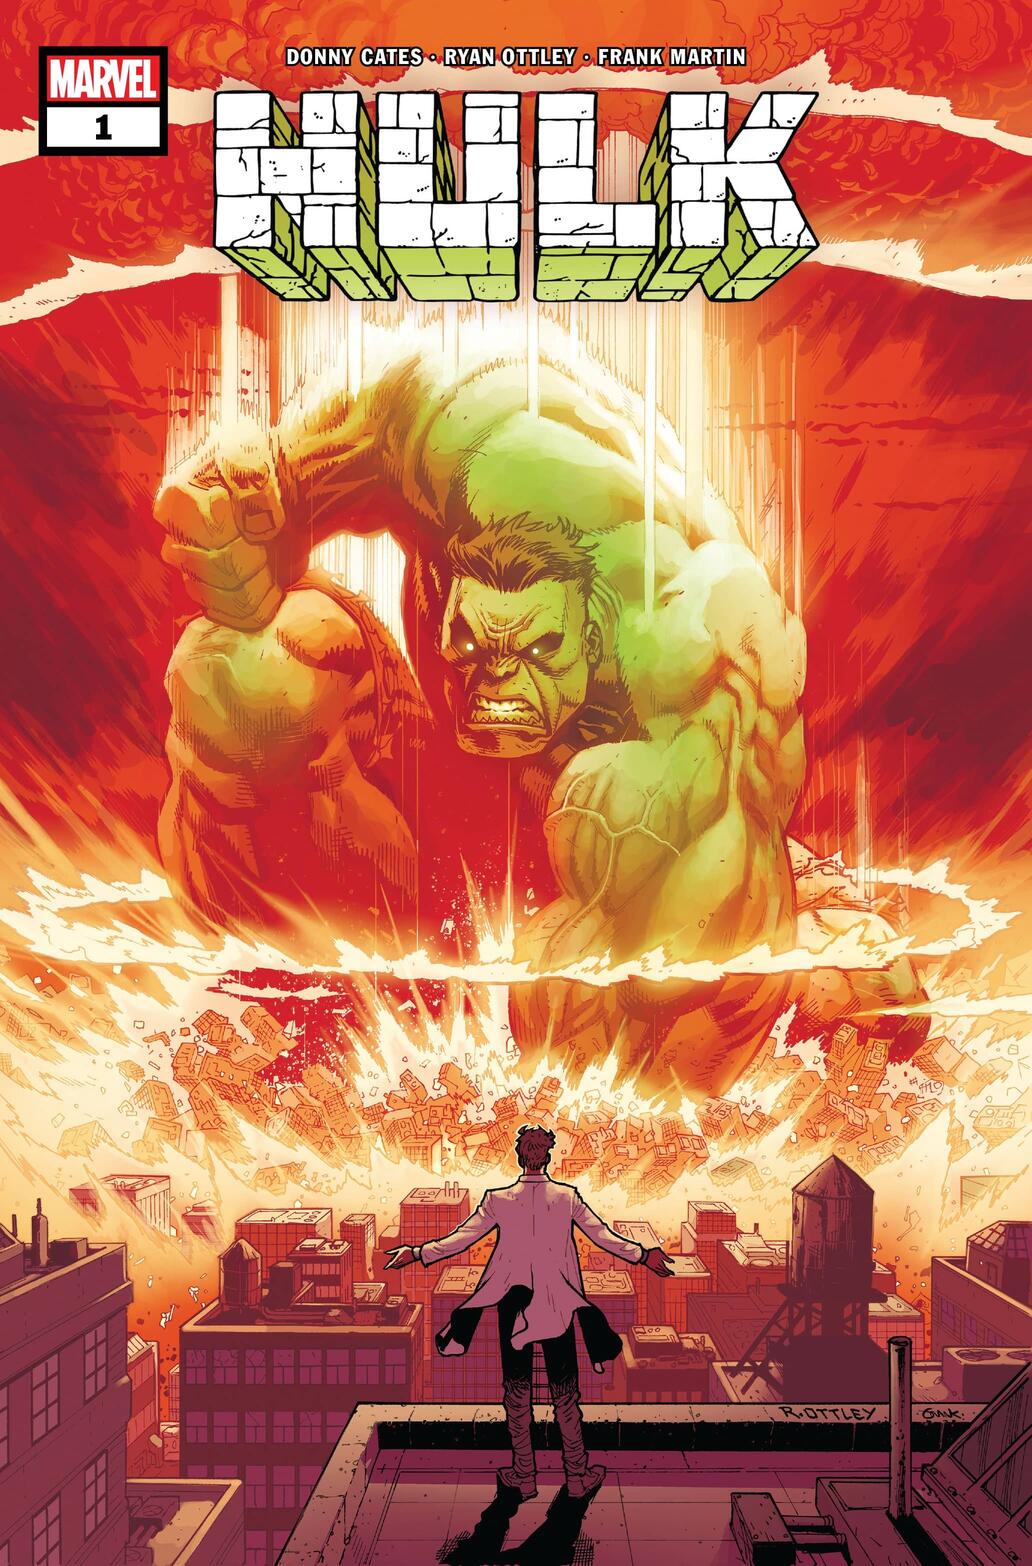 Donny Cates and Ryan Ottley Seek Out the Final Answer to the Hulk's Uncontrollable Rage in a New Series